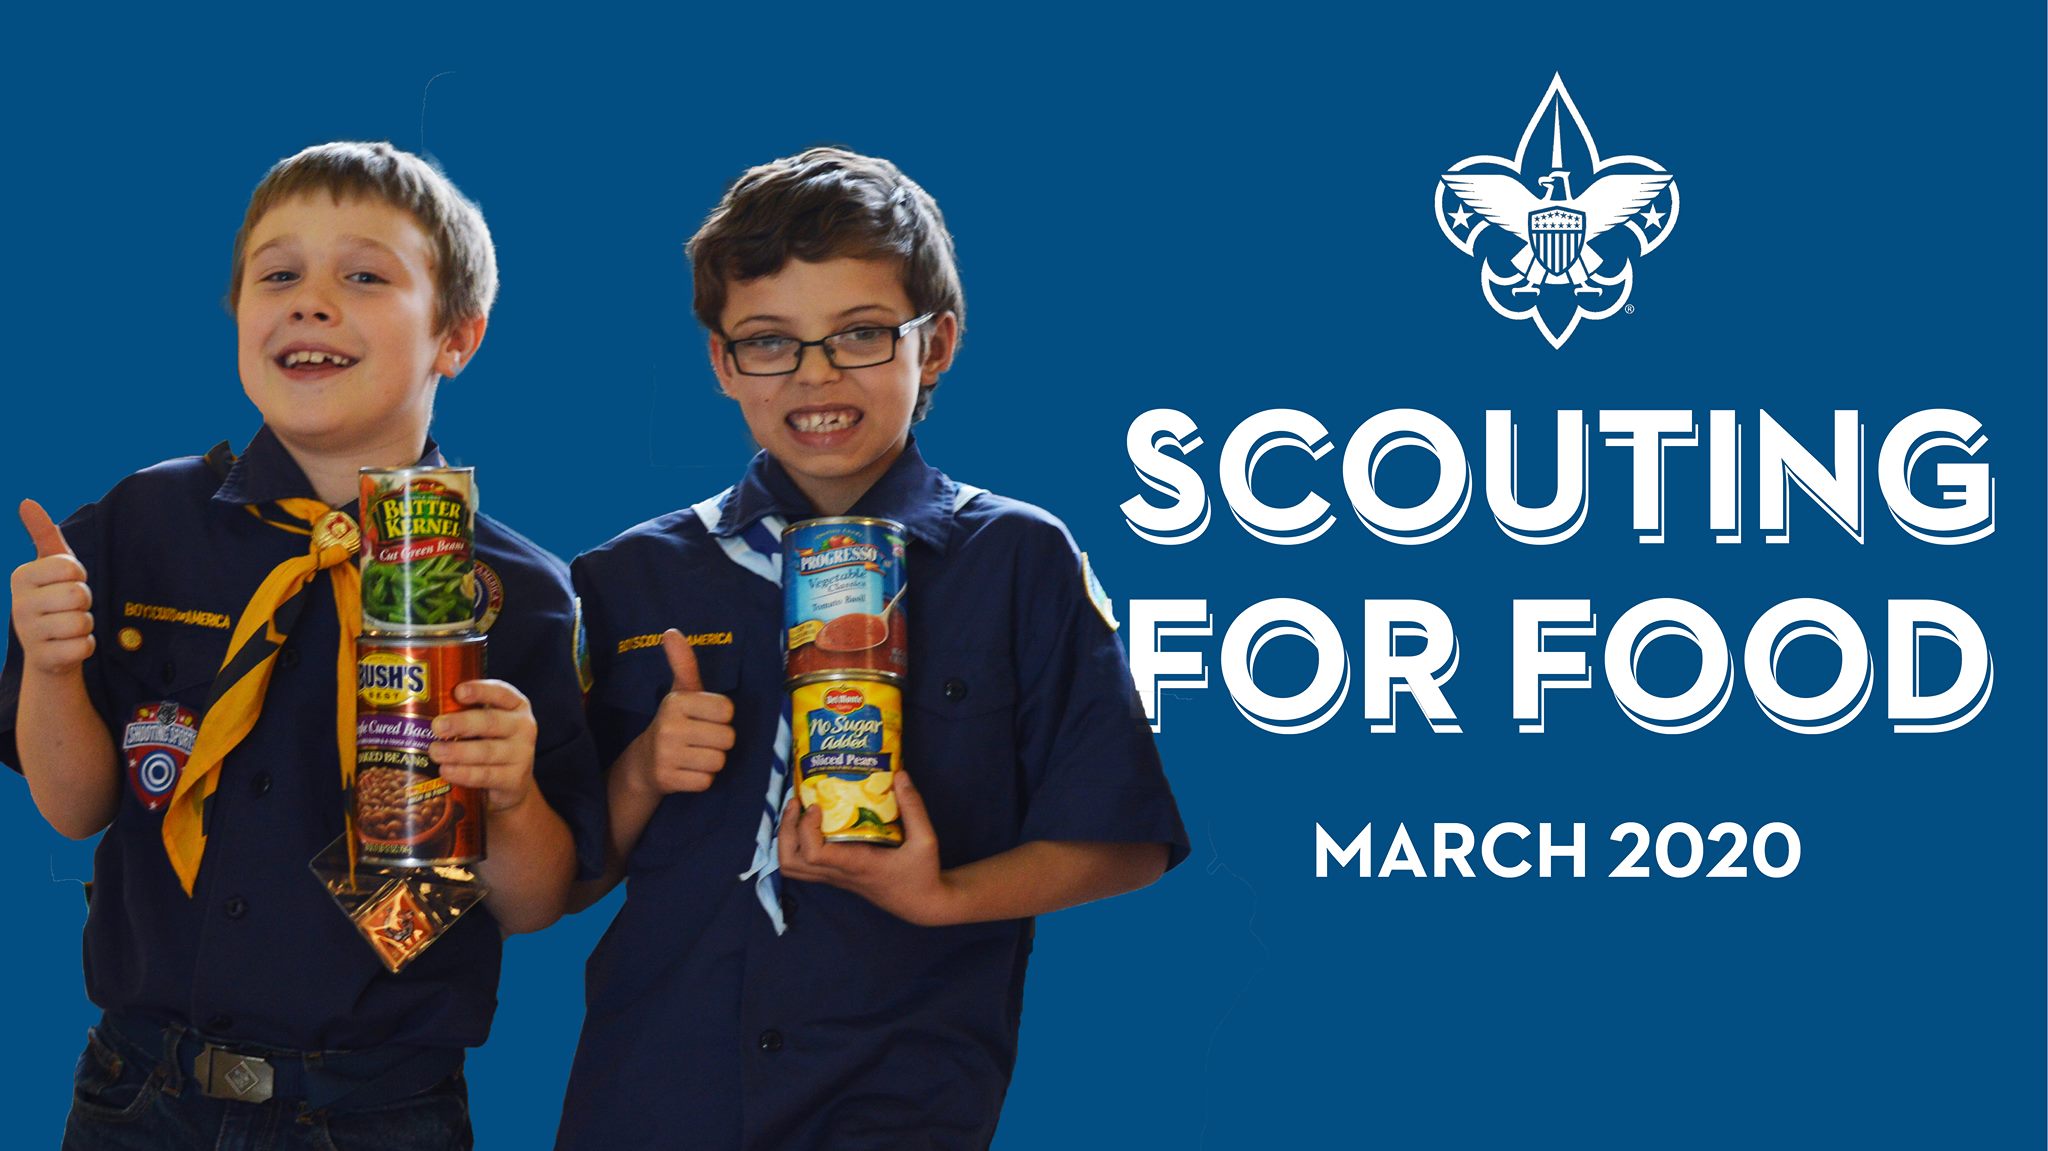 Boy Scouts are Scouting for Food